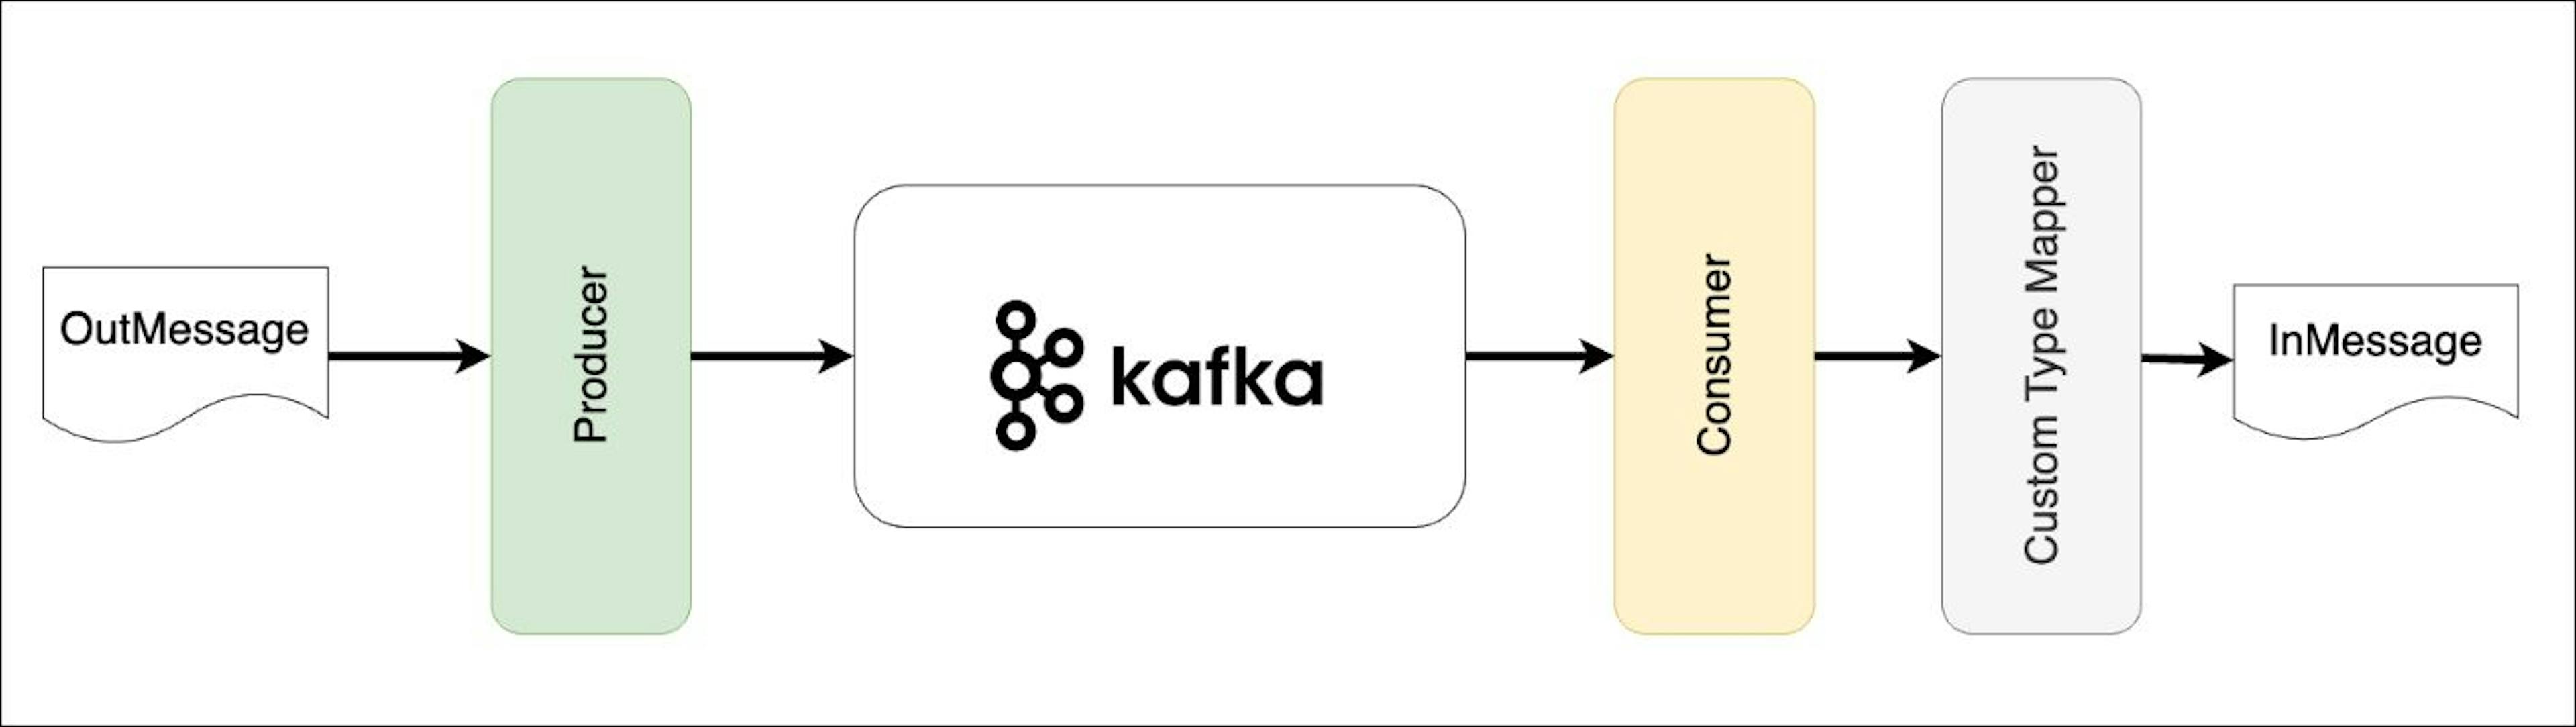 featured image - Handling Custom Type Mapping in Kafka Listeners for Messages with "TypeId" Header